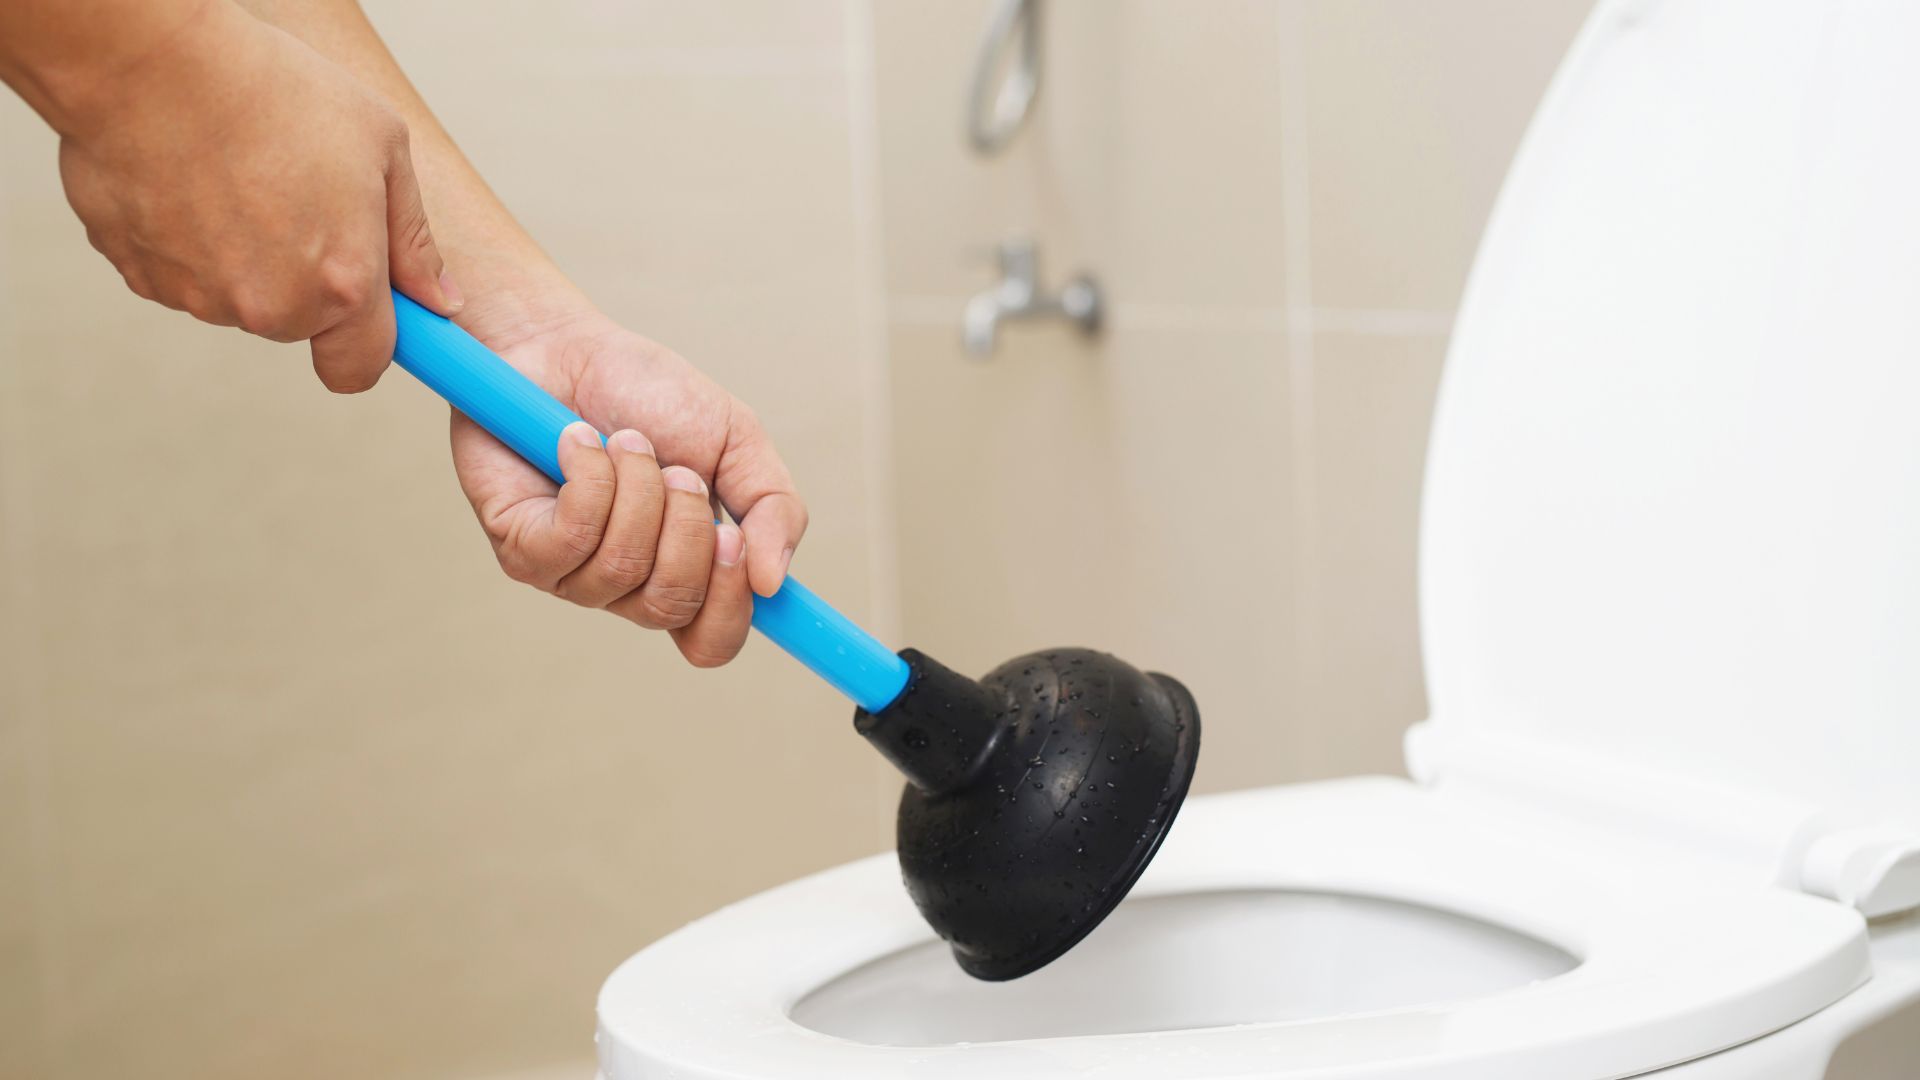 Blocked or clogged toilet service provided by professional plumbers.